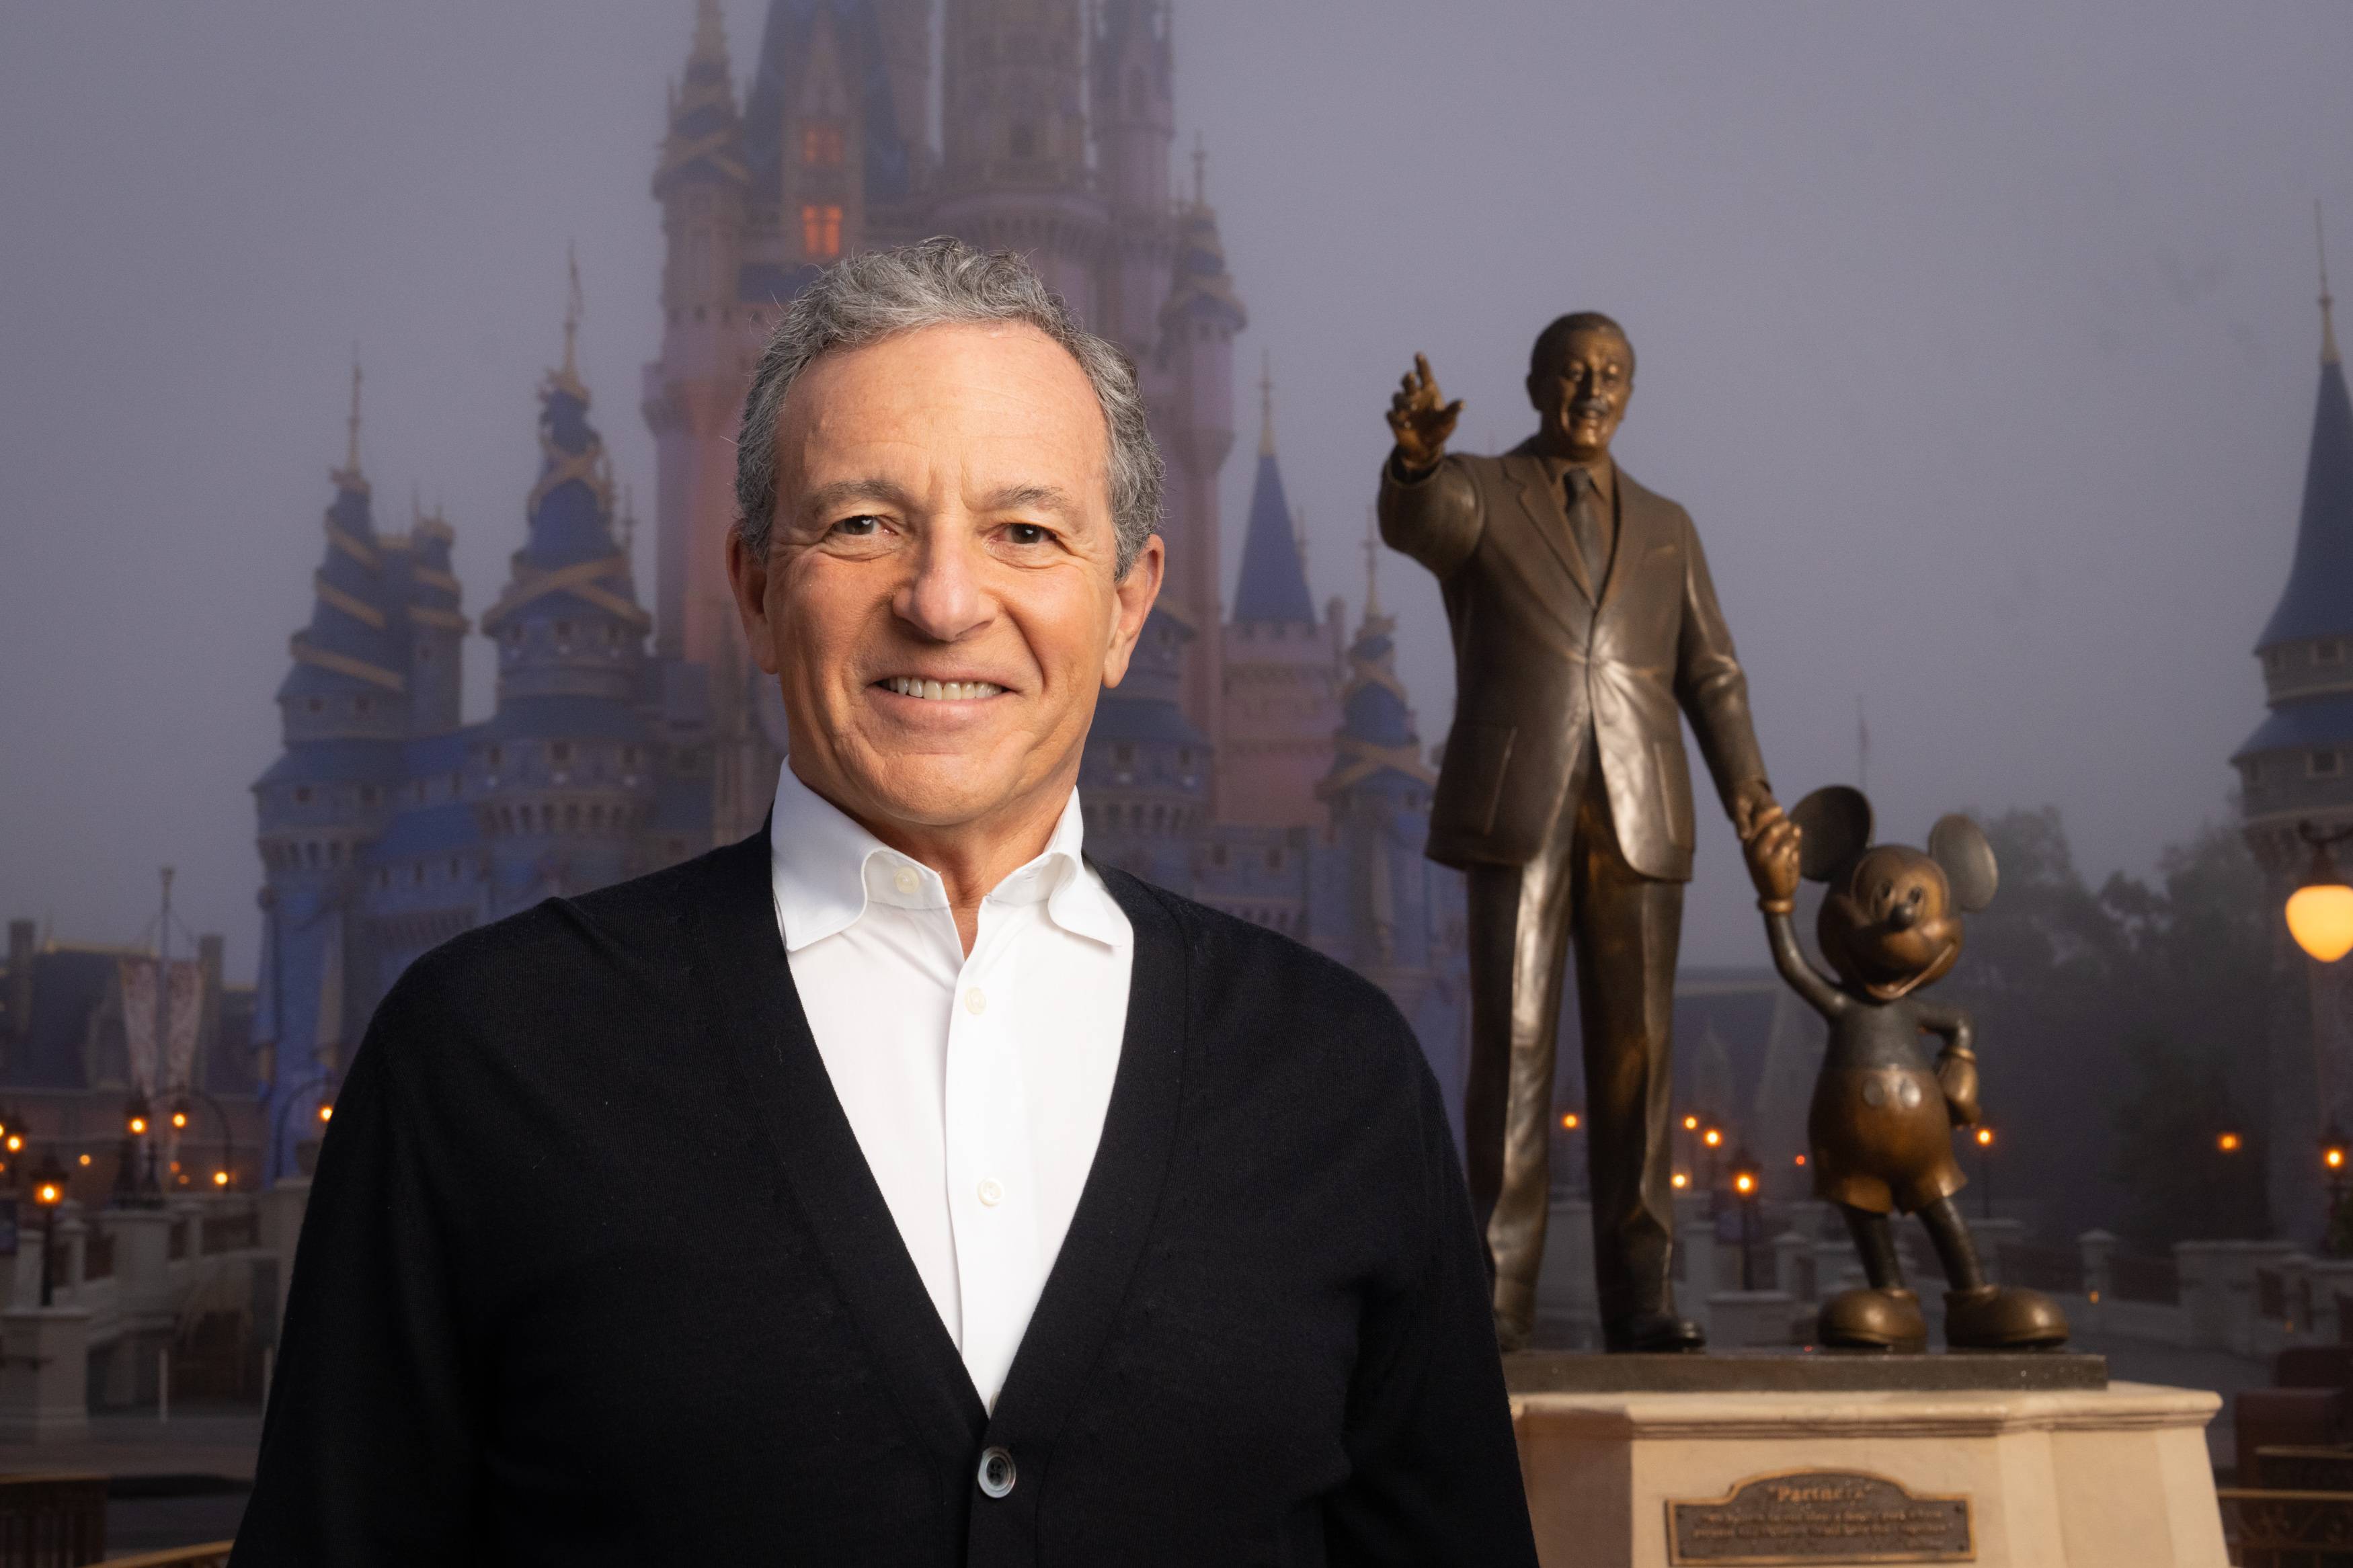 Disney CEO Bob Iger remains confident in the potential of the parks and will turbo-charge investment over the next decade